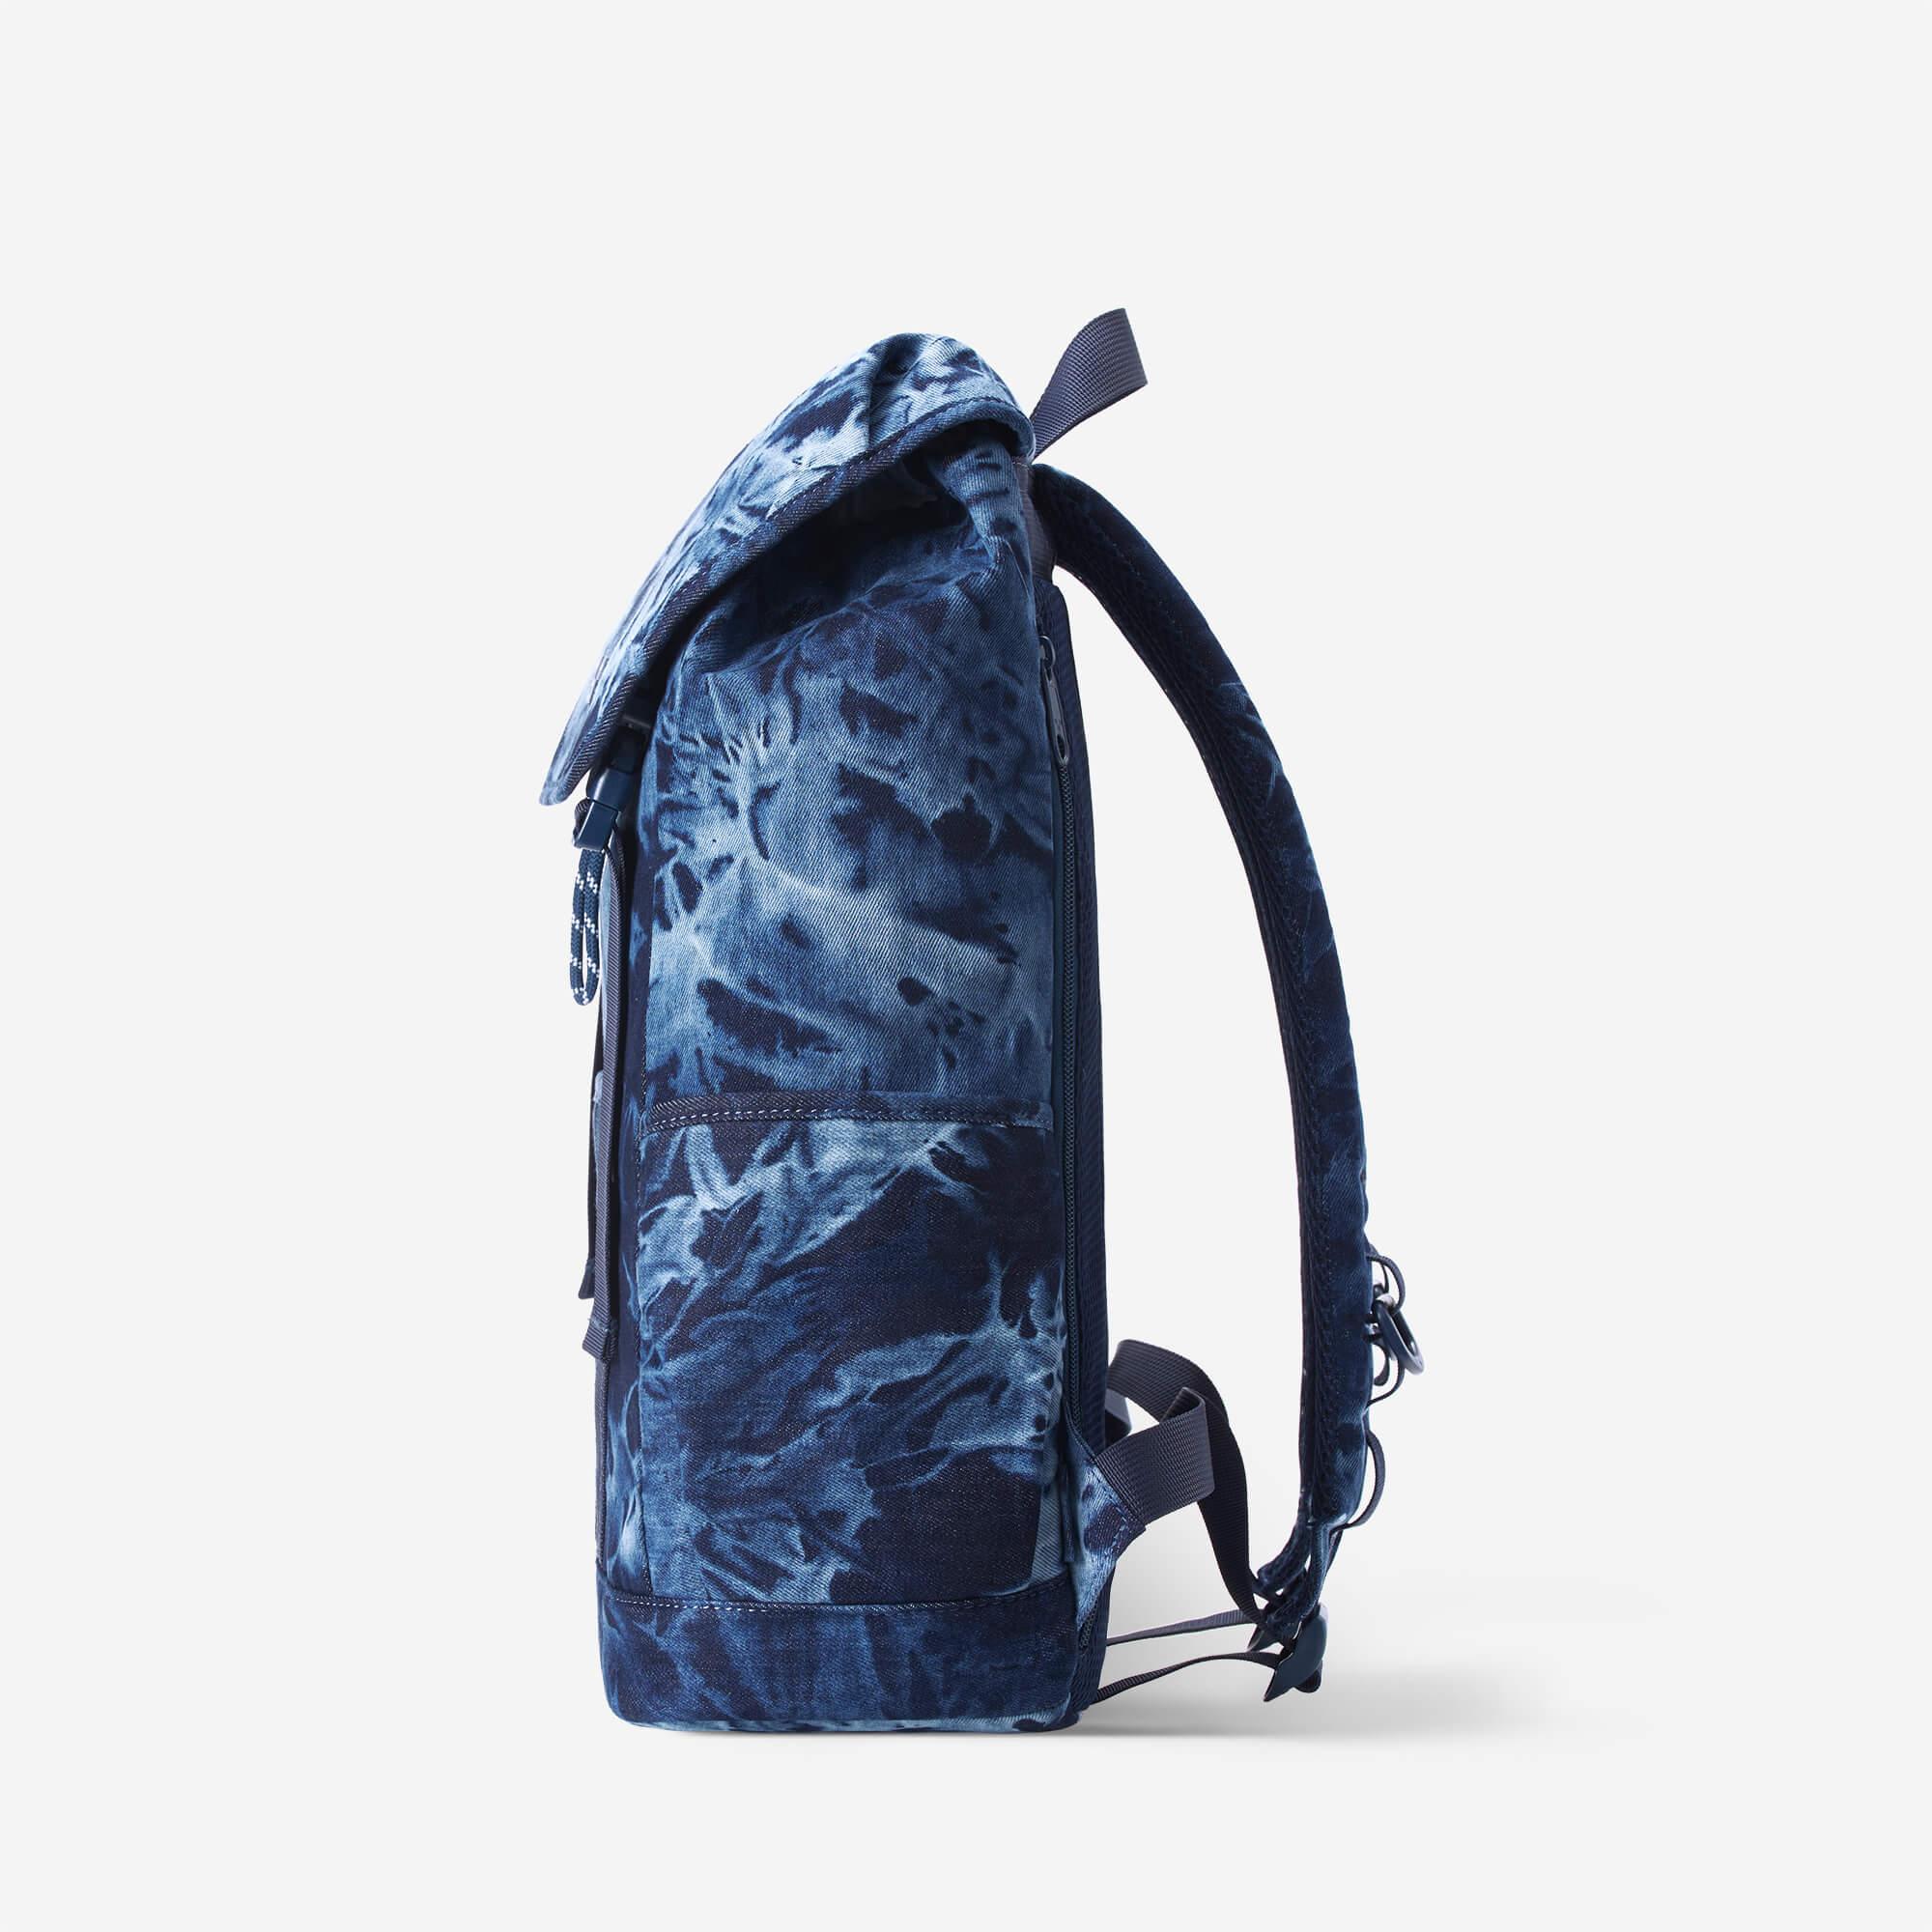 Young Tour Backpack| Recycloth | Ocean Blue | 18L